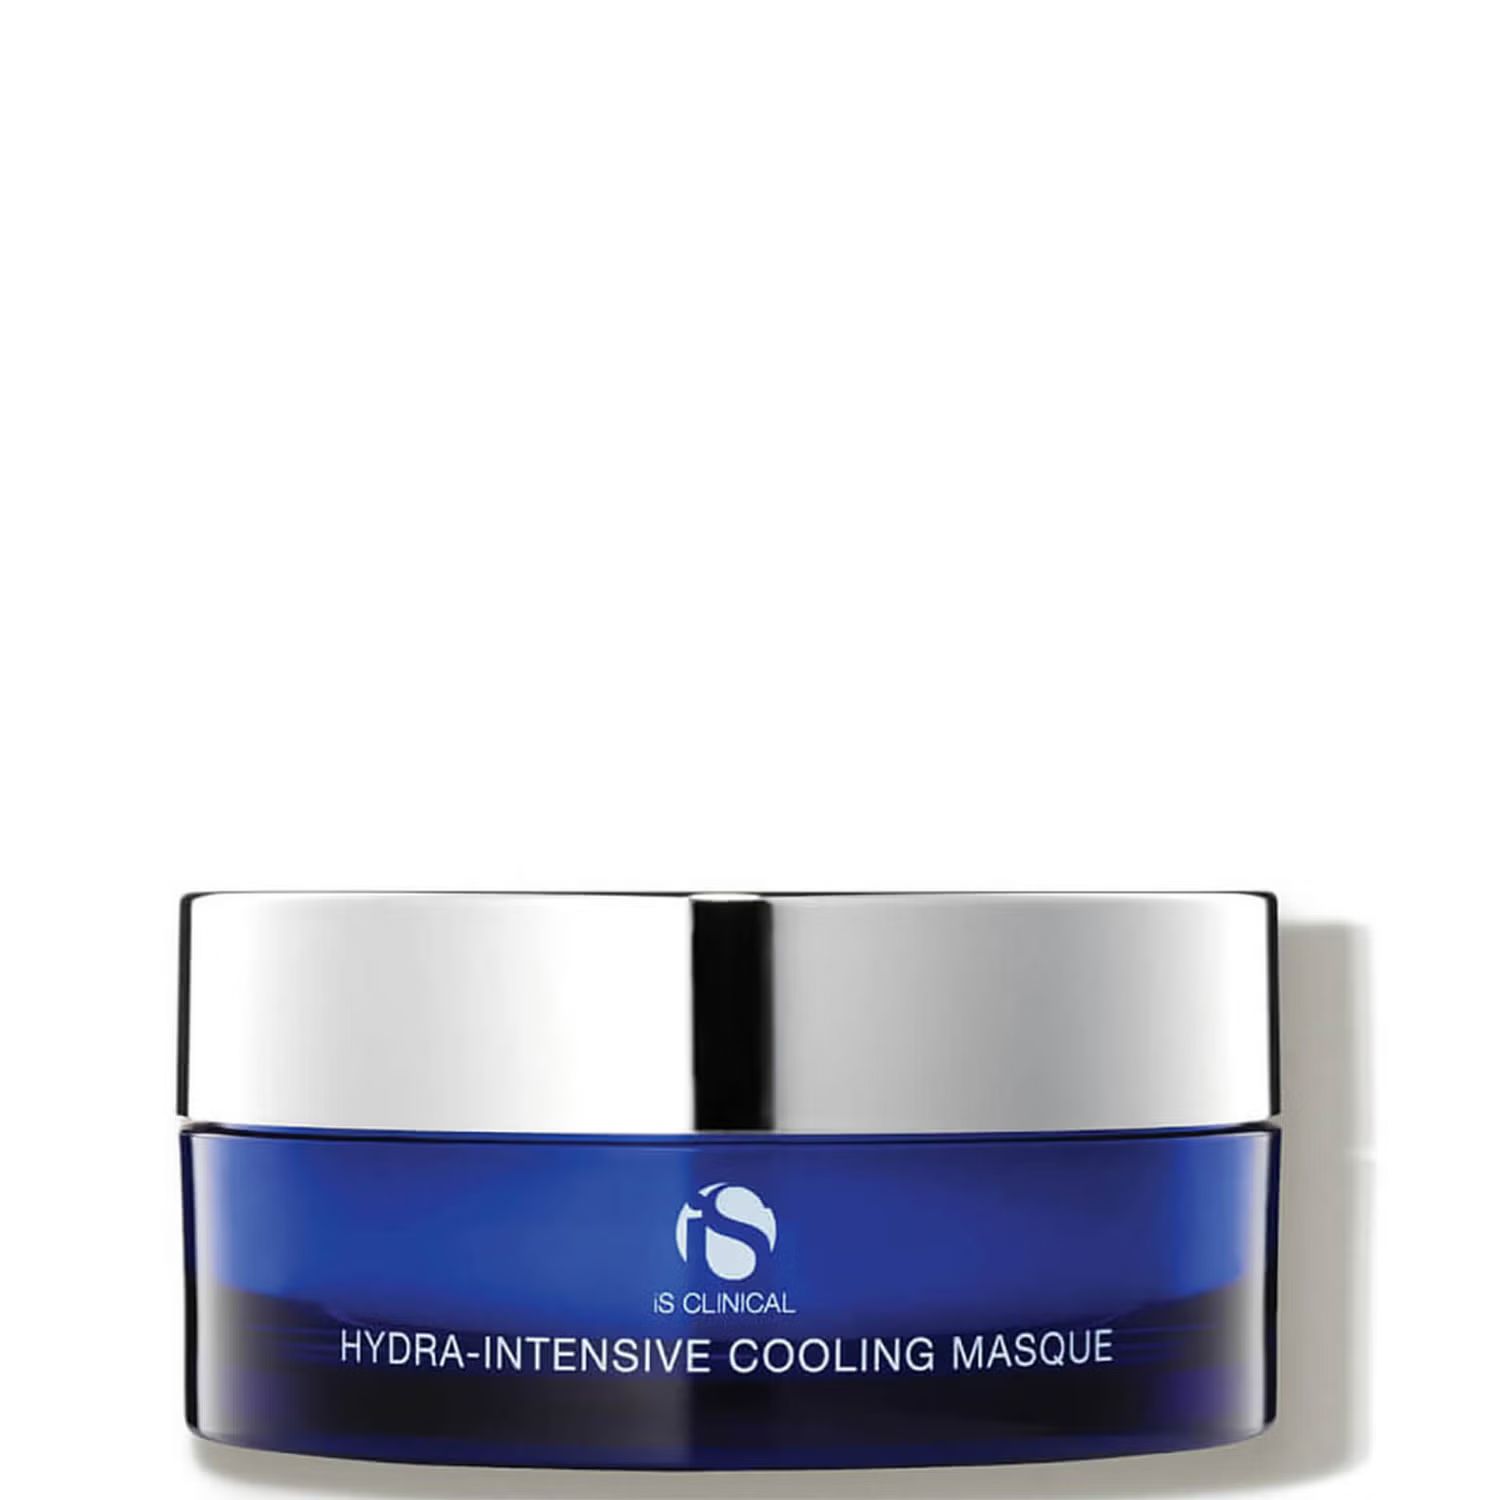 iS Clinical Hydra-Intensive Cooling Masque (4 oz.) | Dermstore